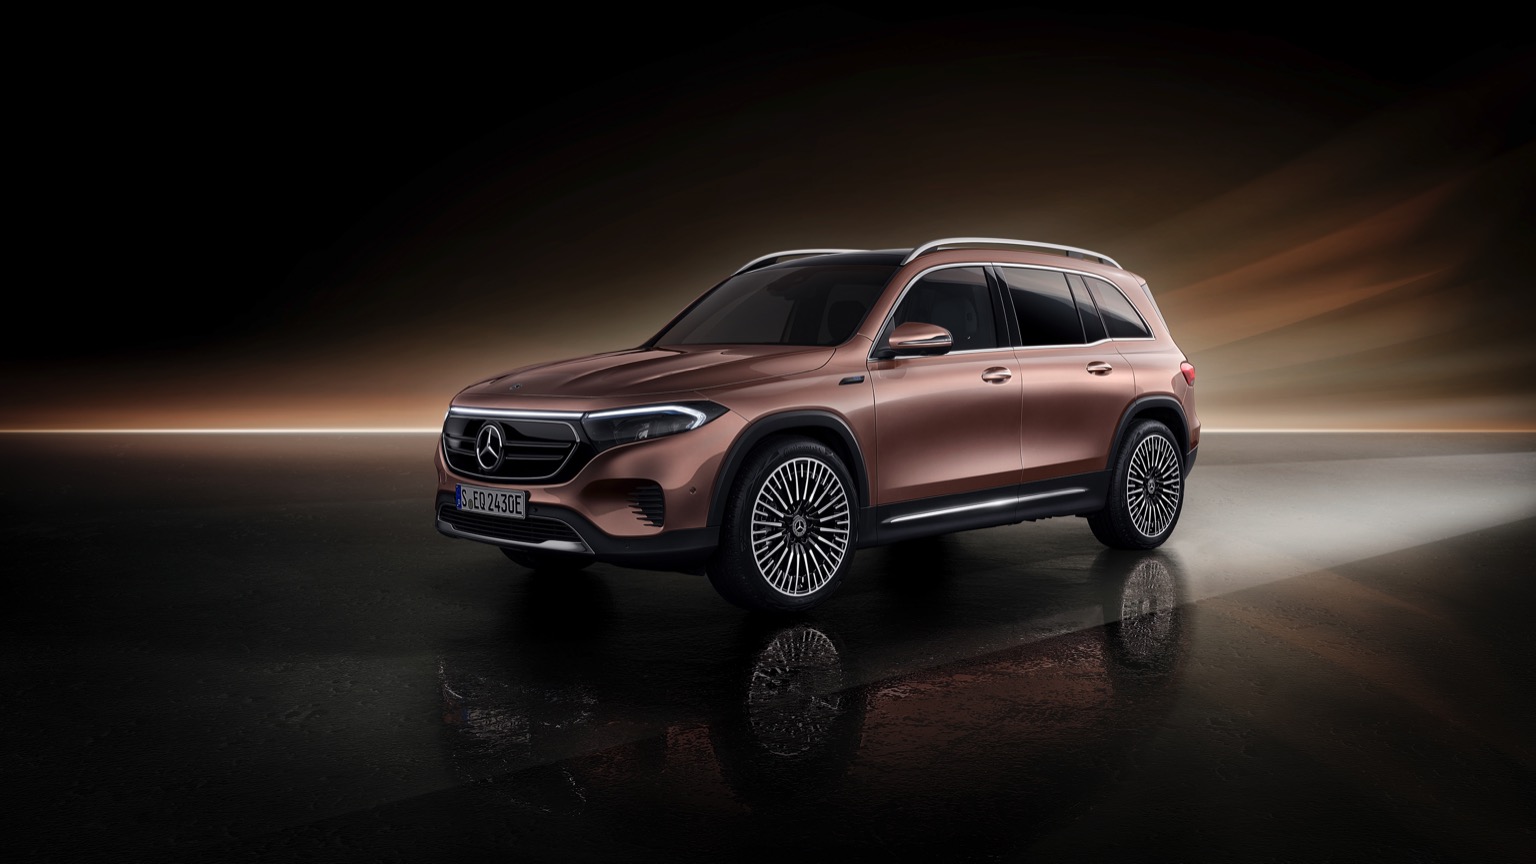 Mercedes-Benz EQB Electric luxury SUV launched in India.